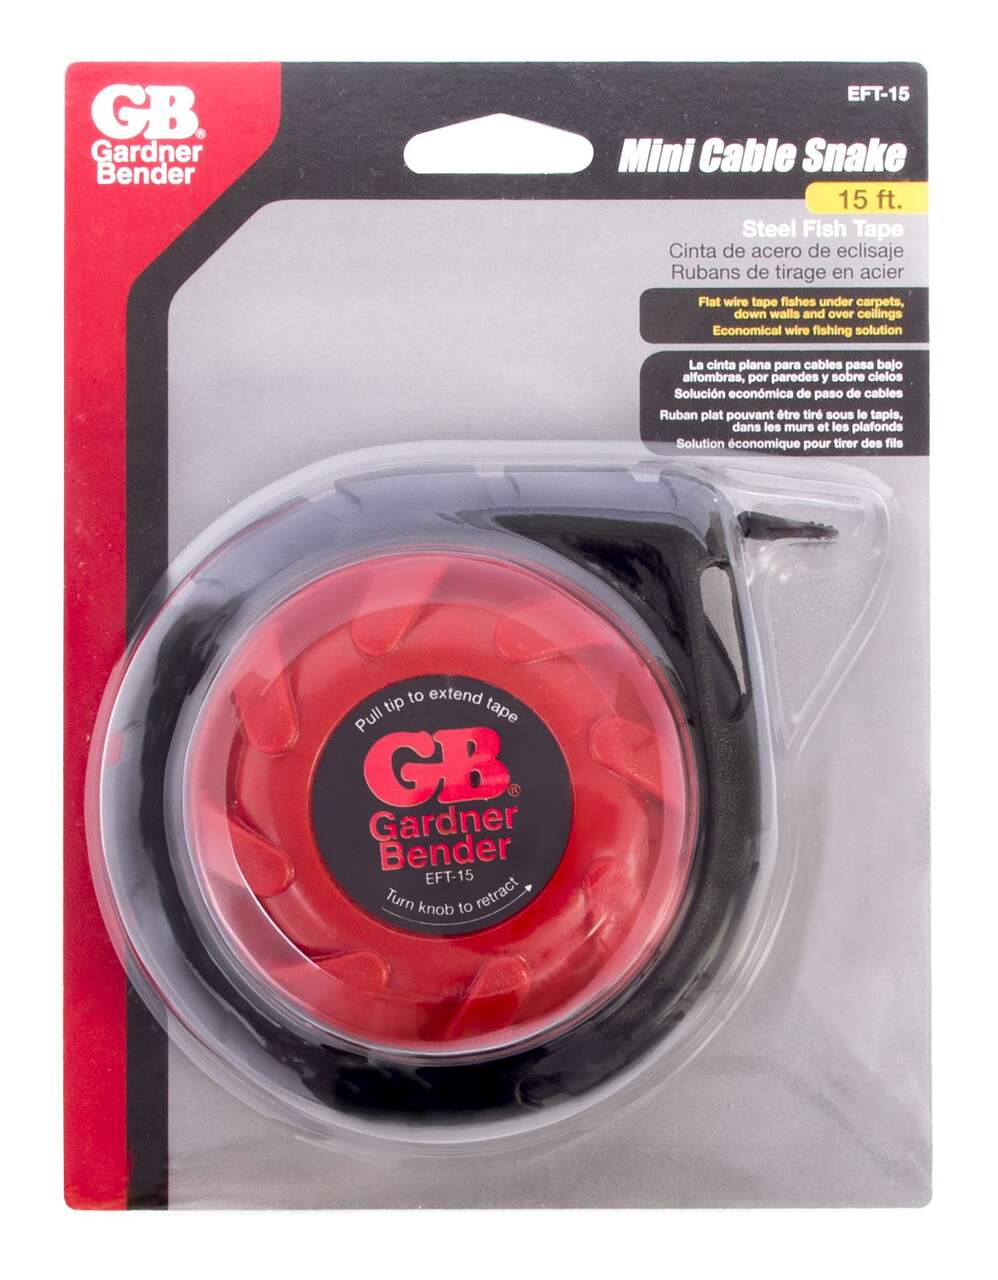 https://media-www.canadiantire.ca/product/fixing/electrical/rough-electrical/0529456/mini-cable-snake-b246e314-1a79-488e-8072-7c9d74f8357f-jpgrendition.jpg?imdensity=1&imwidth=1244&impolicy=mZoom